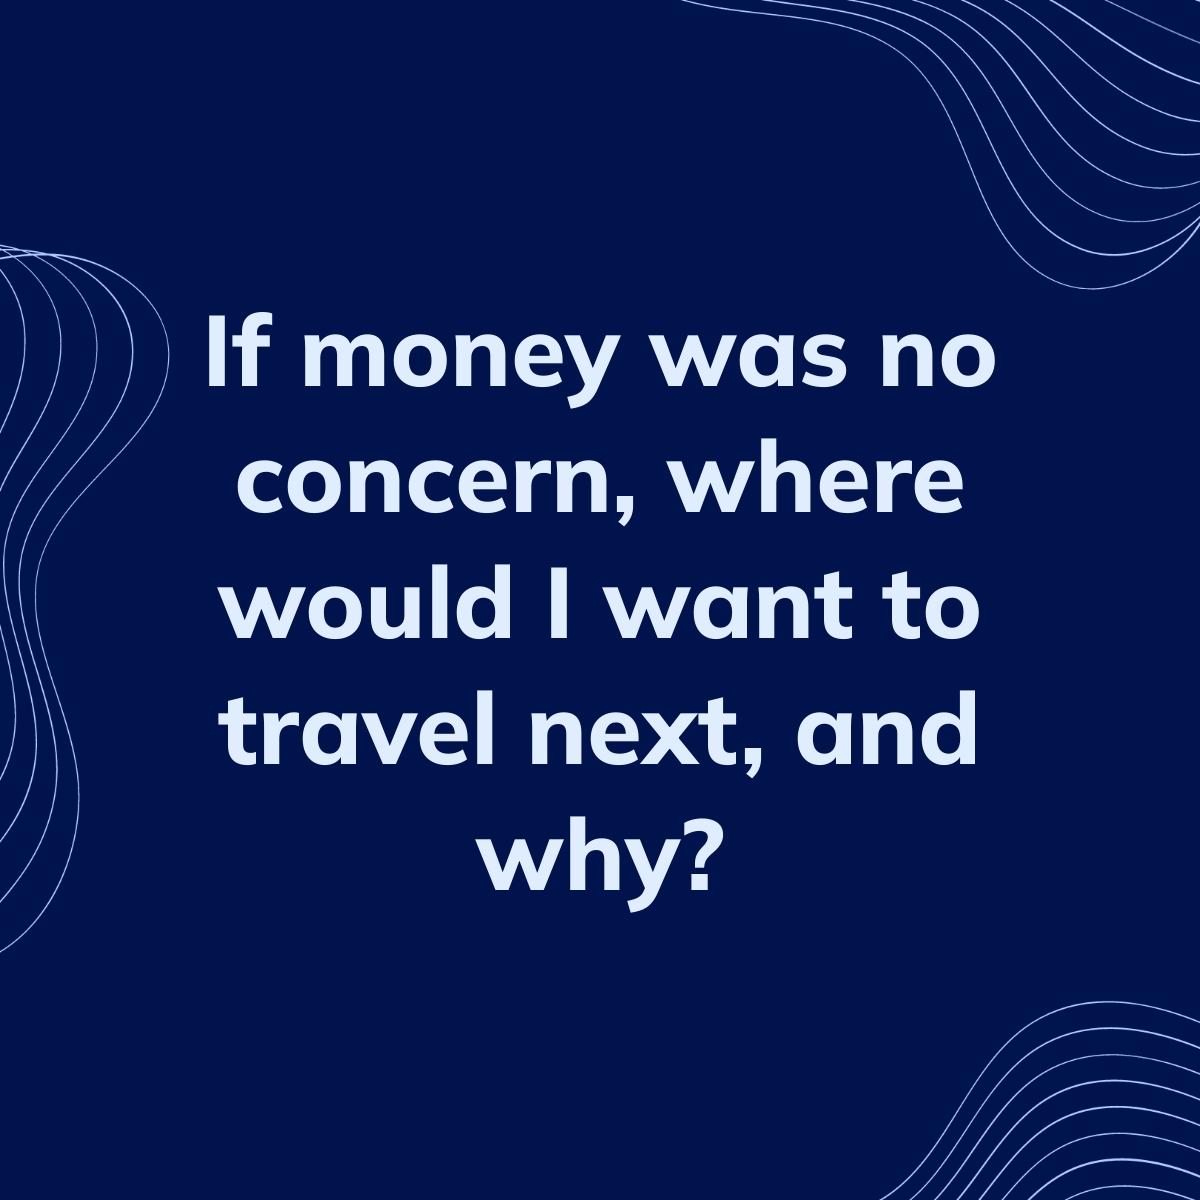 Journal Prompt: If money was no concern, where would I want to travel next, and why?